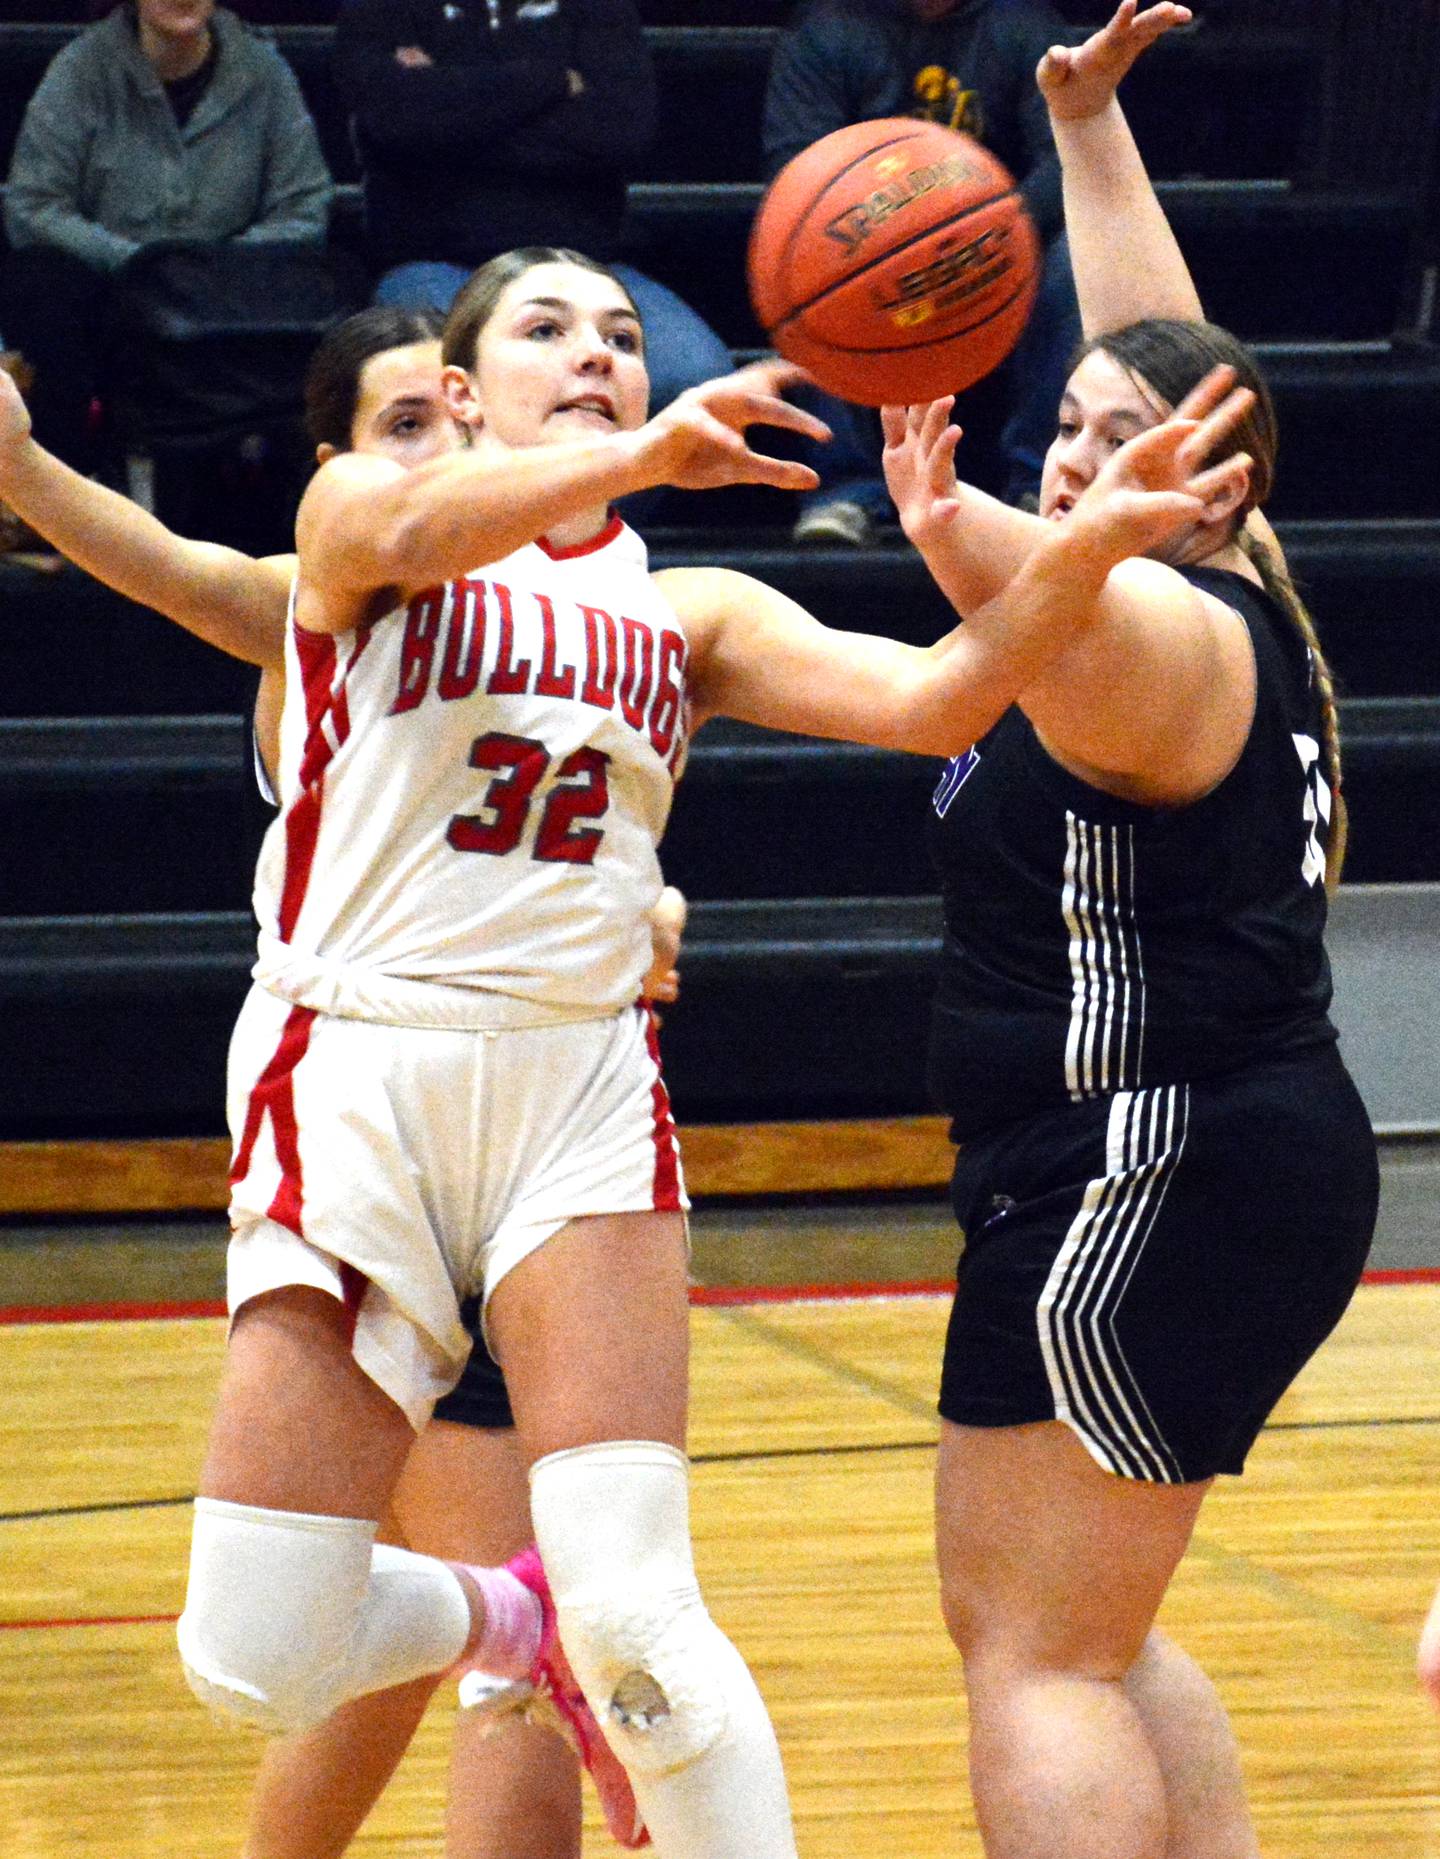 Orient-Macksburg's Emma Boswell passes out of traffic against Murray Thursday, Feb. 8 in the opening round of the playoffs.